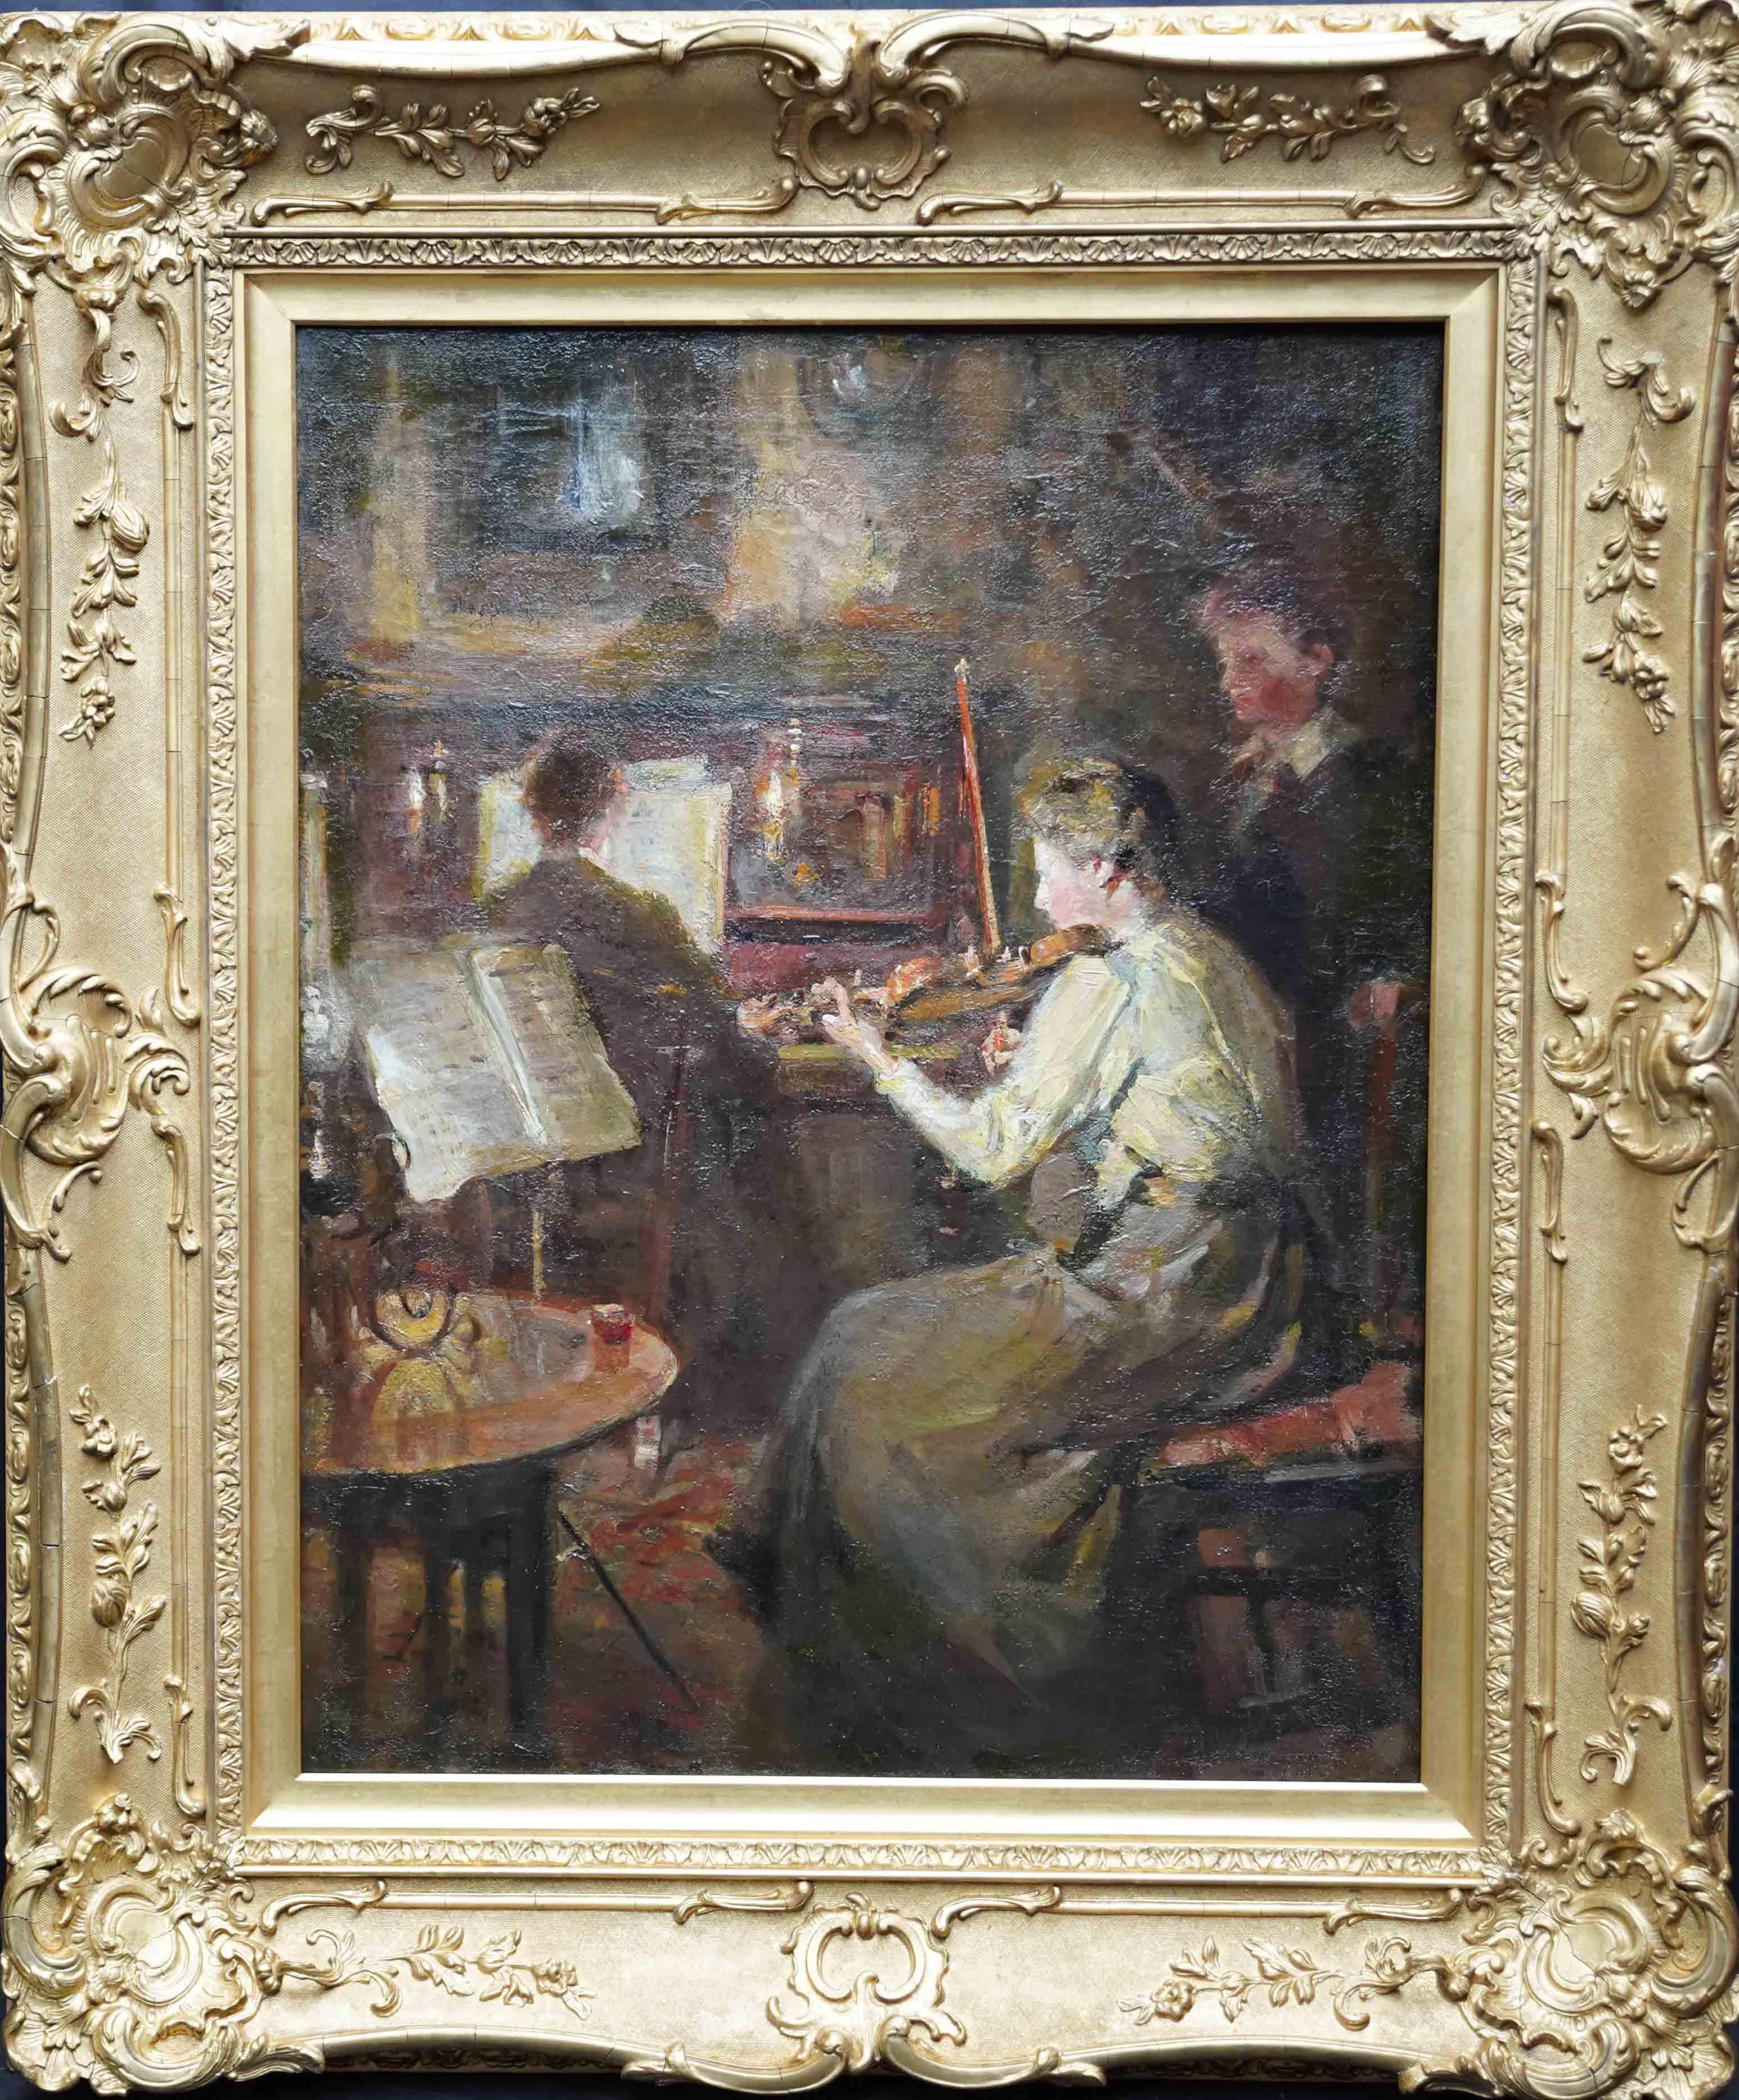 William Christian Symons Figurative Painting - Violinist in an Interior - British Impressionist 19thC art musical oil painting